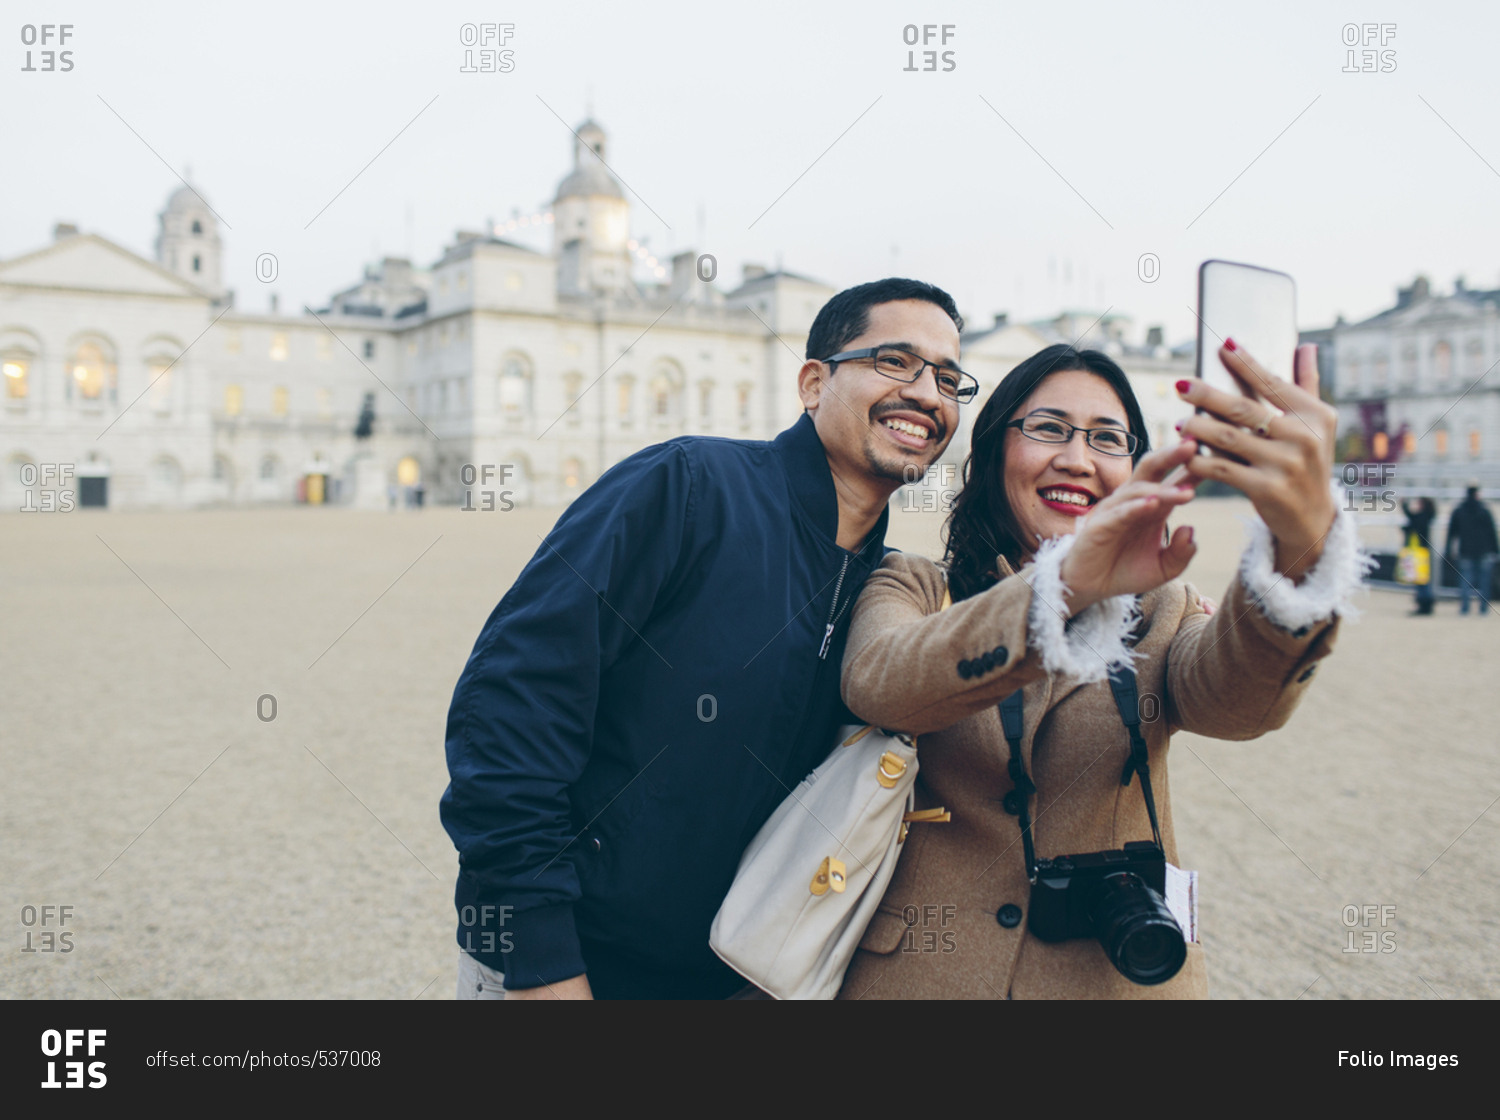 UK, England, London, Mid adult man and woman taking selfies with Horse Guards Parade in background